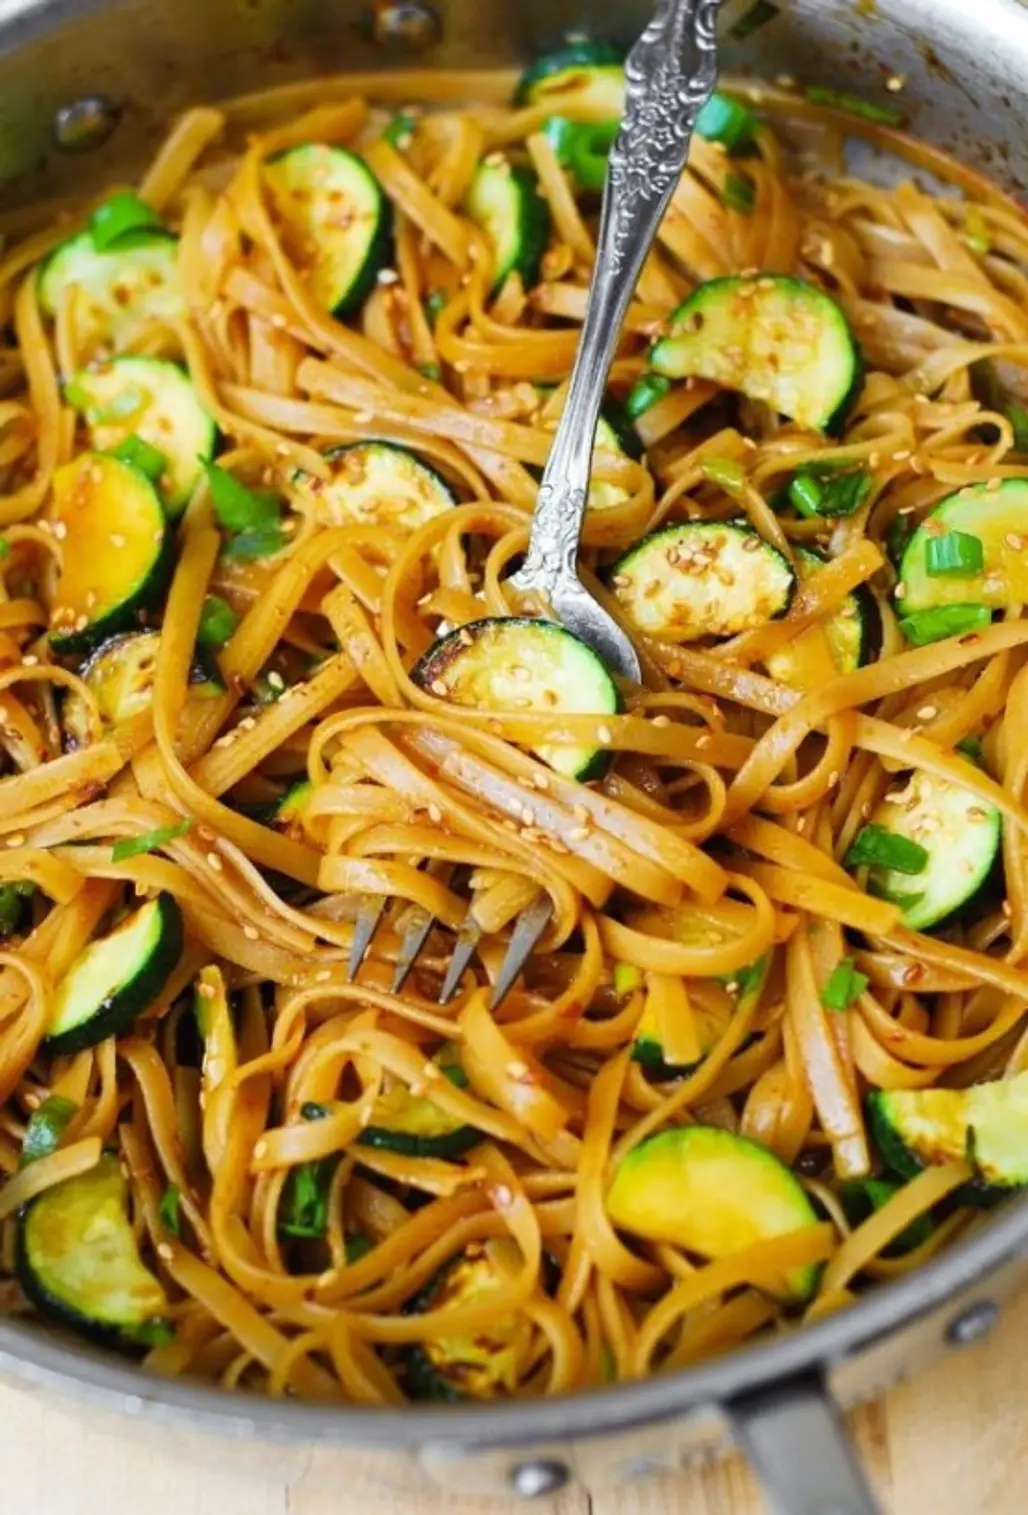 Spicy Thai Zucchini Noodles with Toasted Sesame Seeds